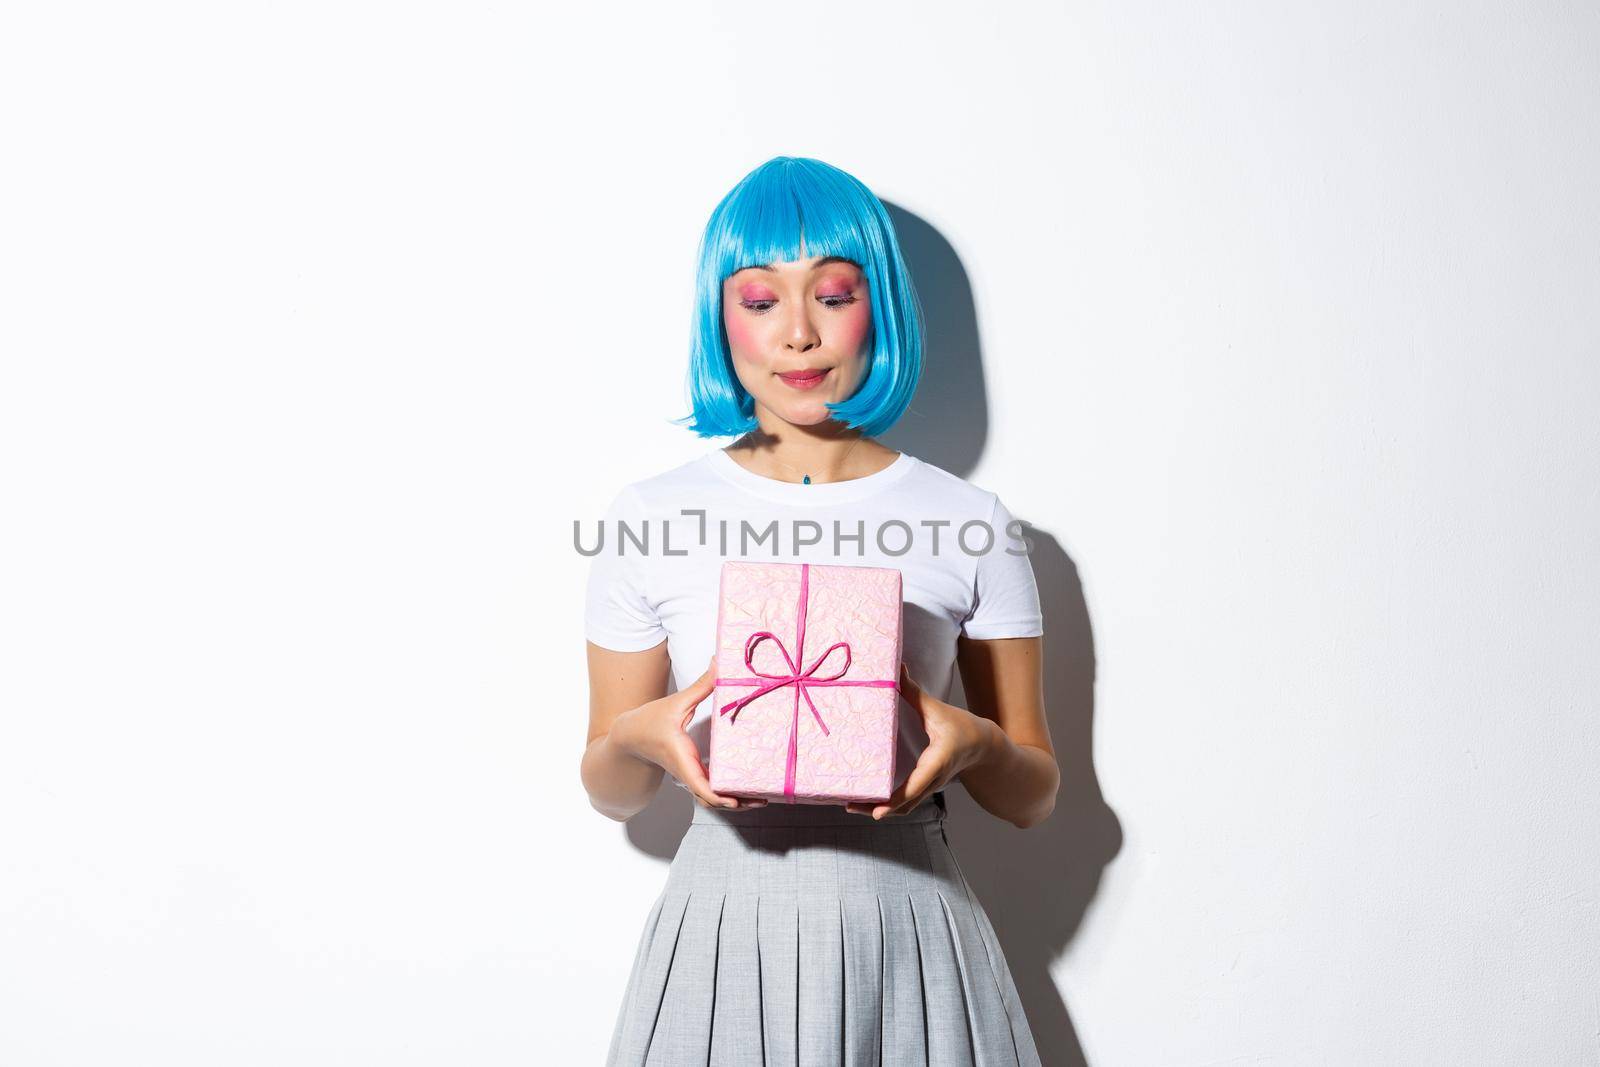 Image of cute b-day girl in blue party wig, looking curious at giftbox, standing over white background.